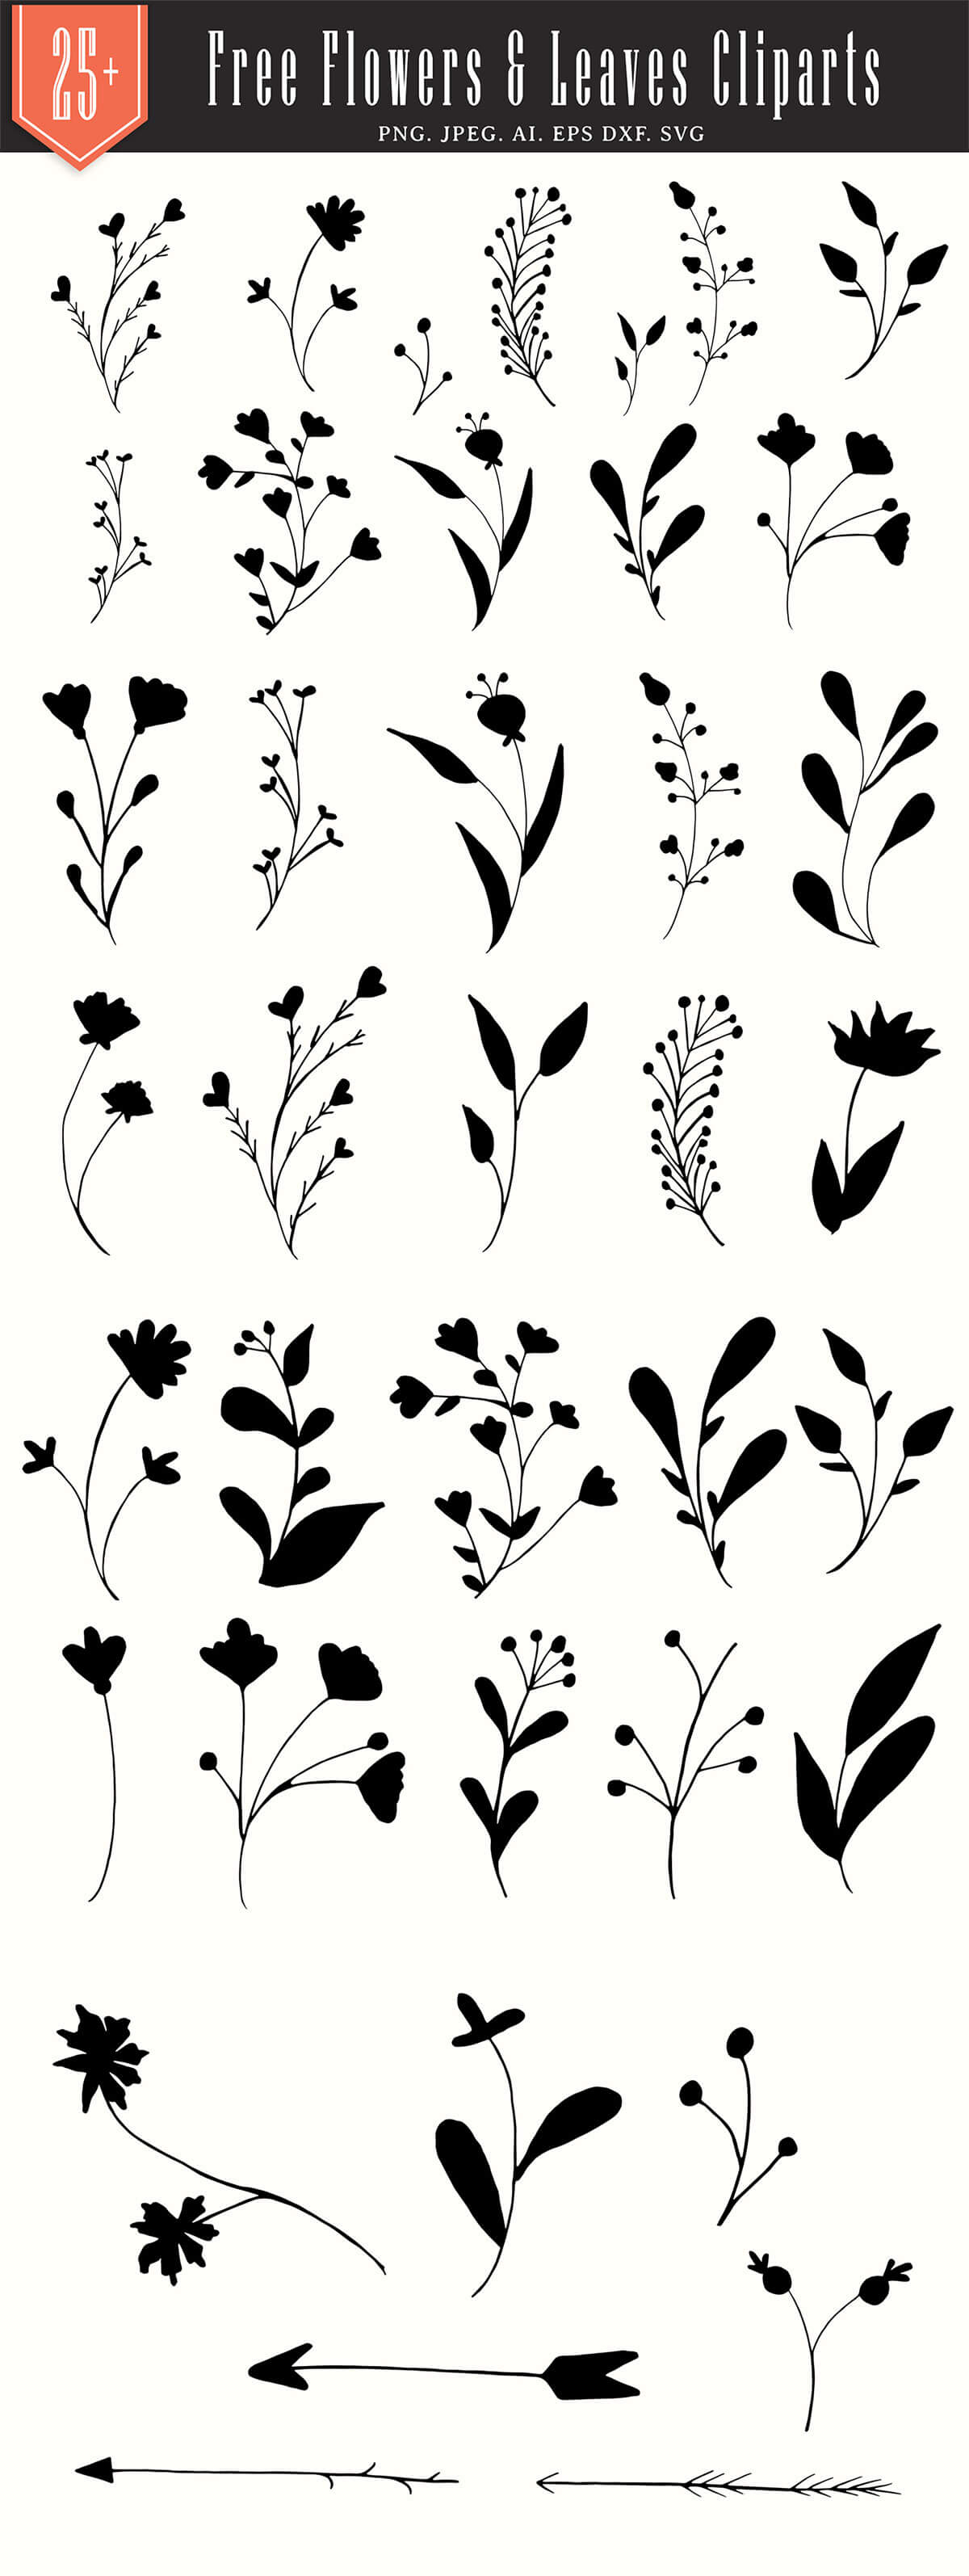 25+ Free Flowers & Leaves Handmade Cliparts